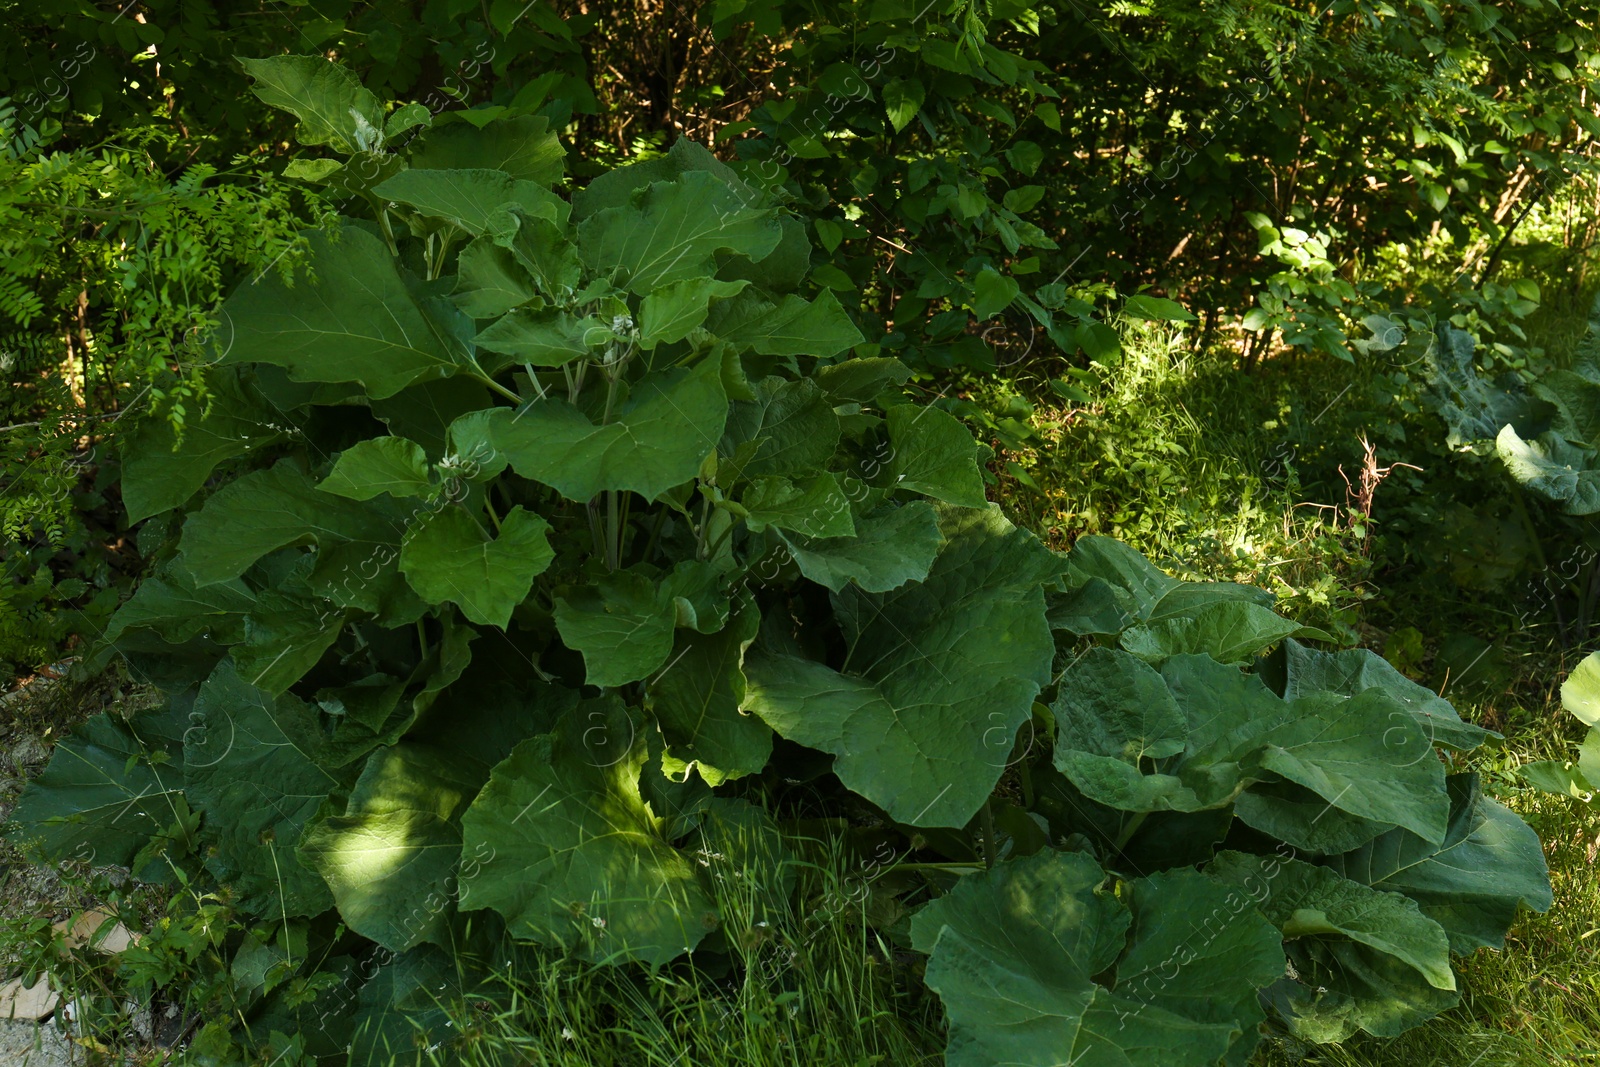 Photo of Burdock plant with big green leaves outdoors